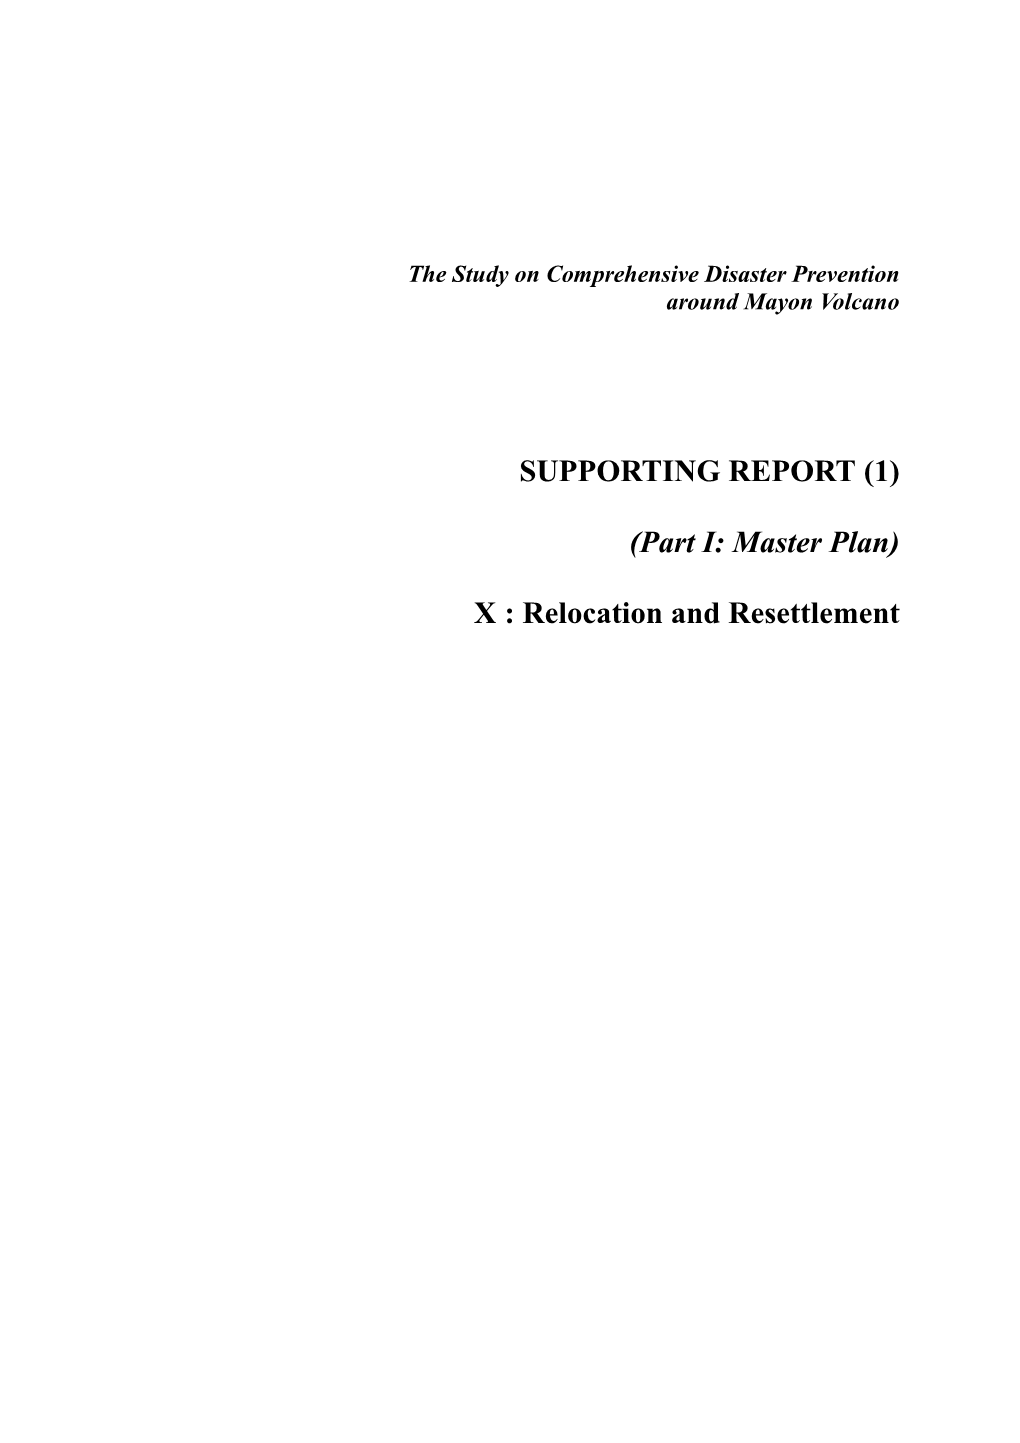 SUPPORTING REPORT (1) (Part I: Master Plan) X : Relocation and Resettlement